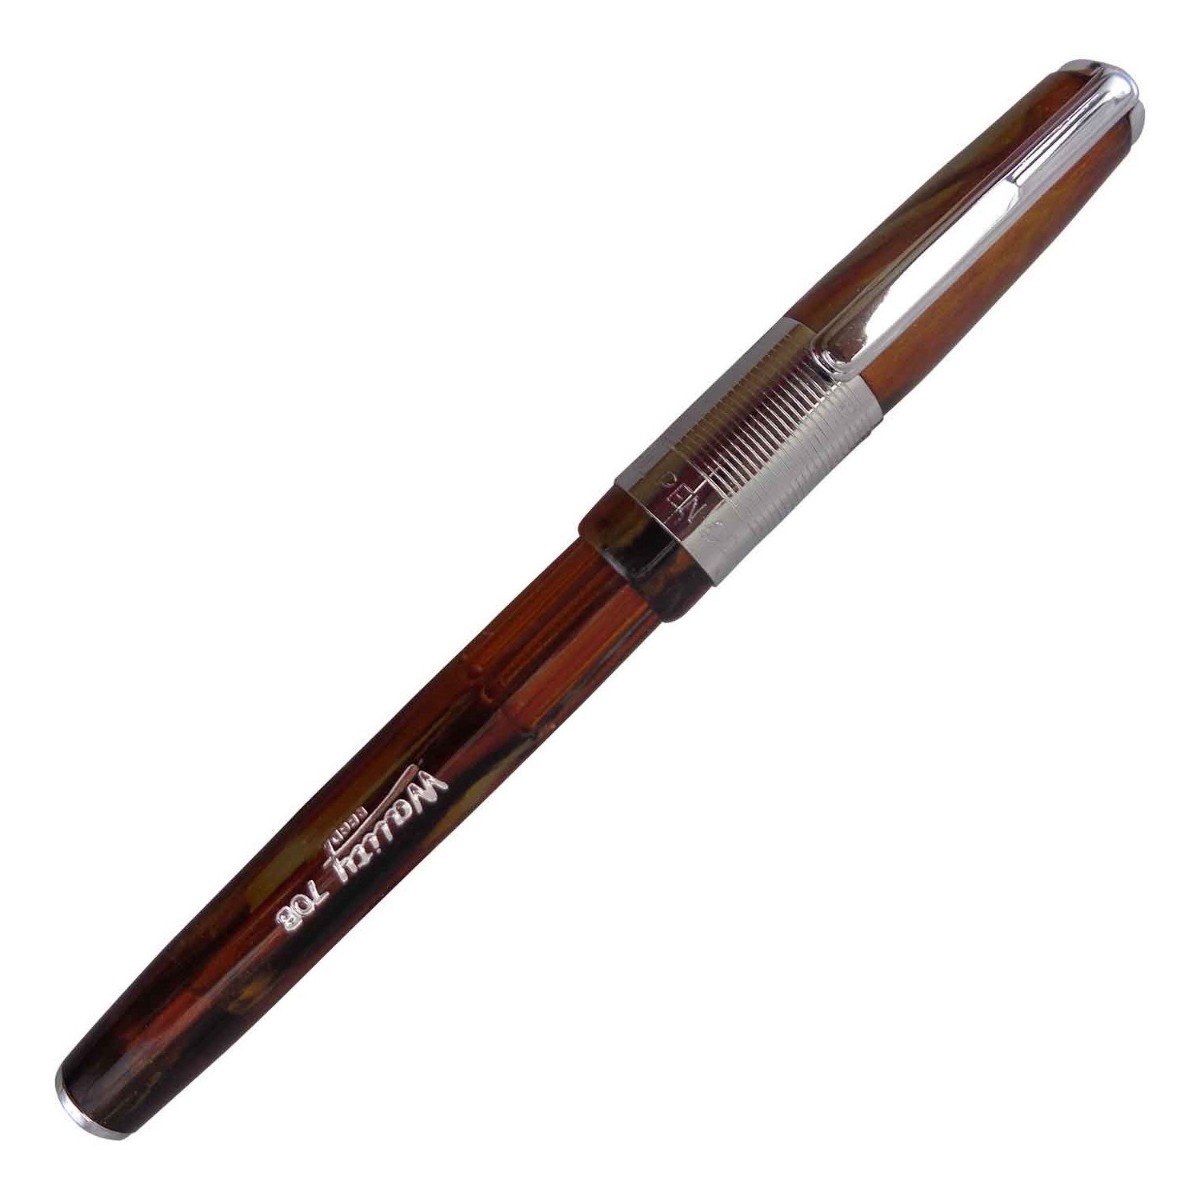 Airmail - Wality 70B Model:16023 Pastel Orange Color Marble Finish Design Body With Silver Clip Cap Type Fine Tip Fountain Pen